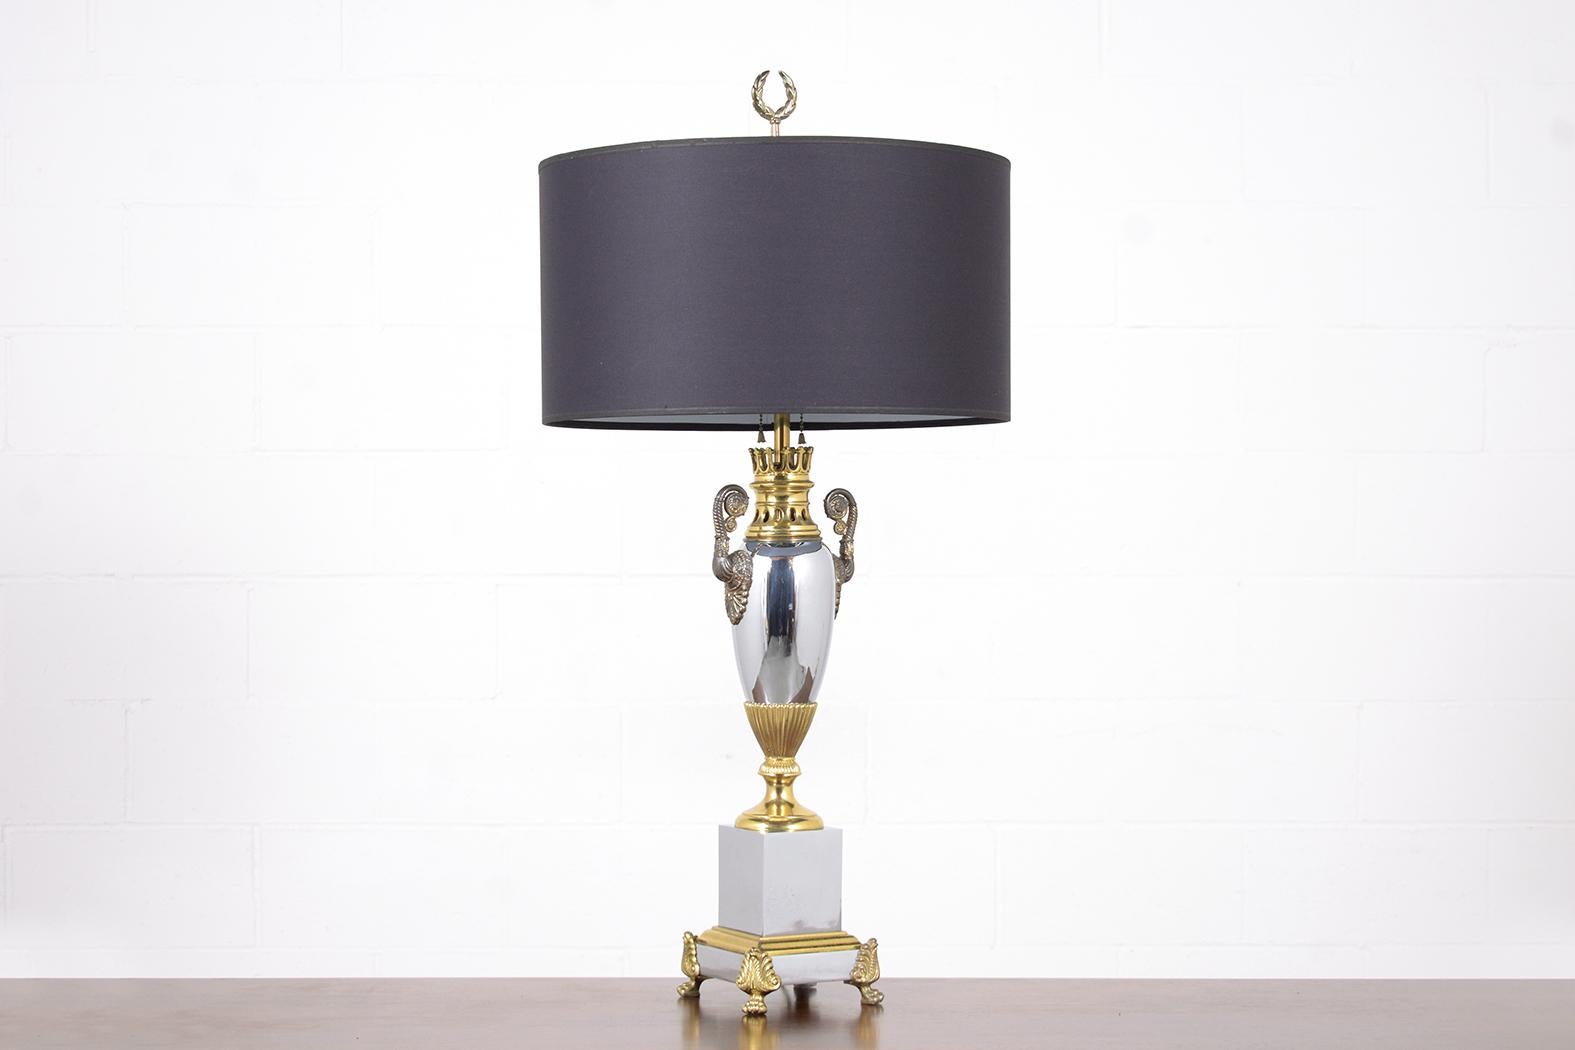 Mid-20th Century 1950s Vintage Regency Style Table Lamps: Silver & Gold Finish with Black Shades For Sale